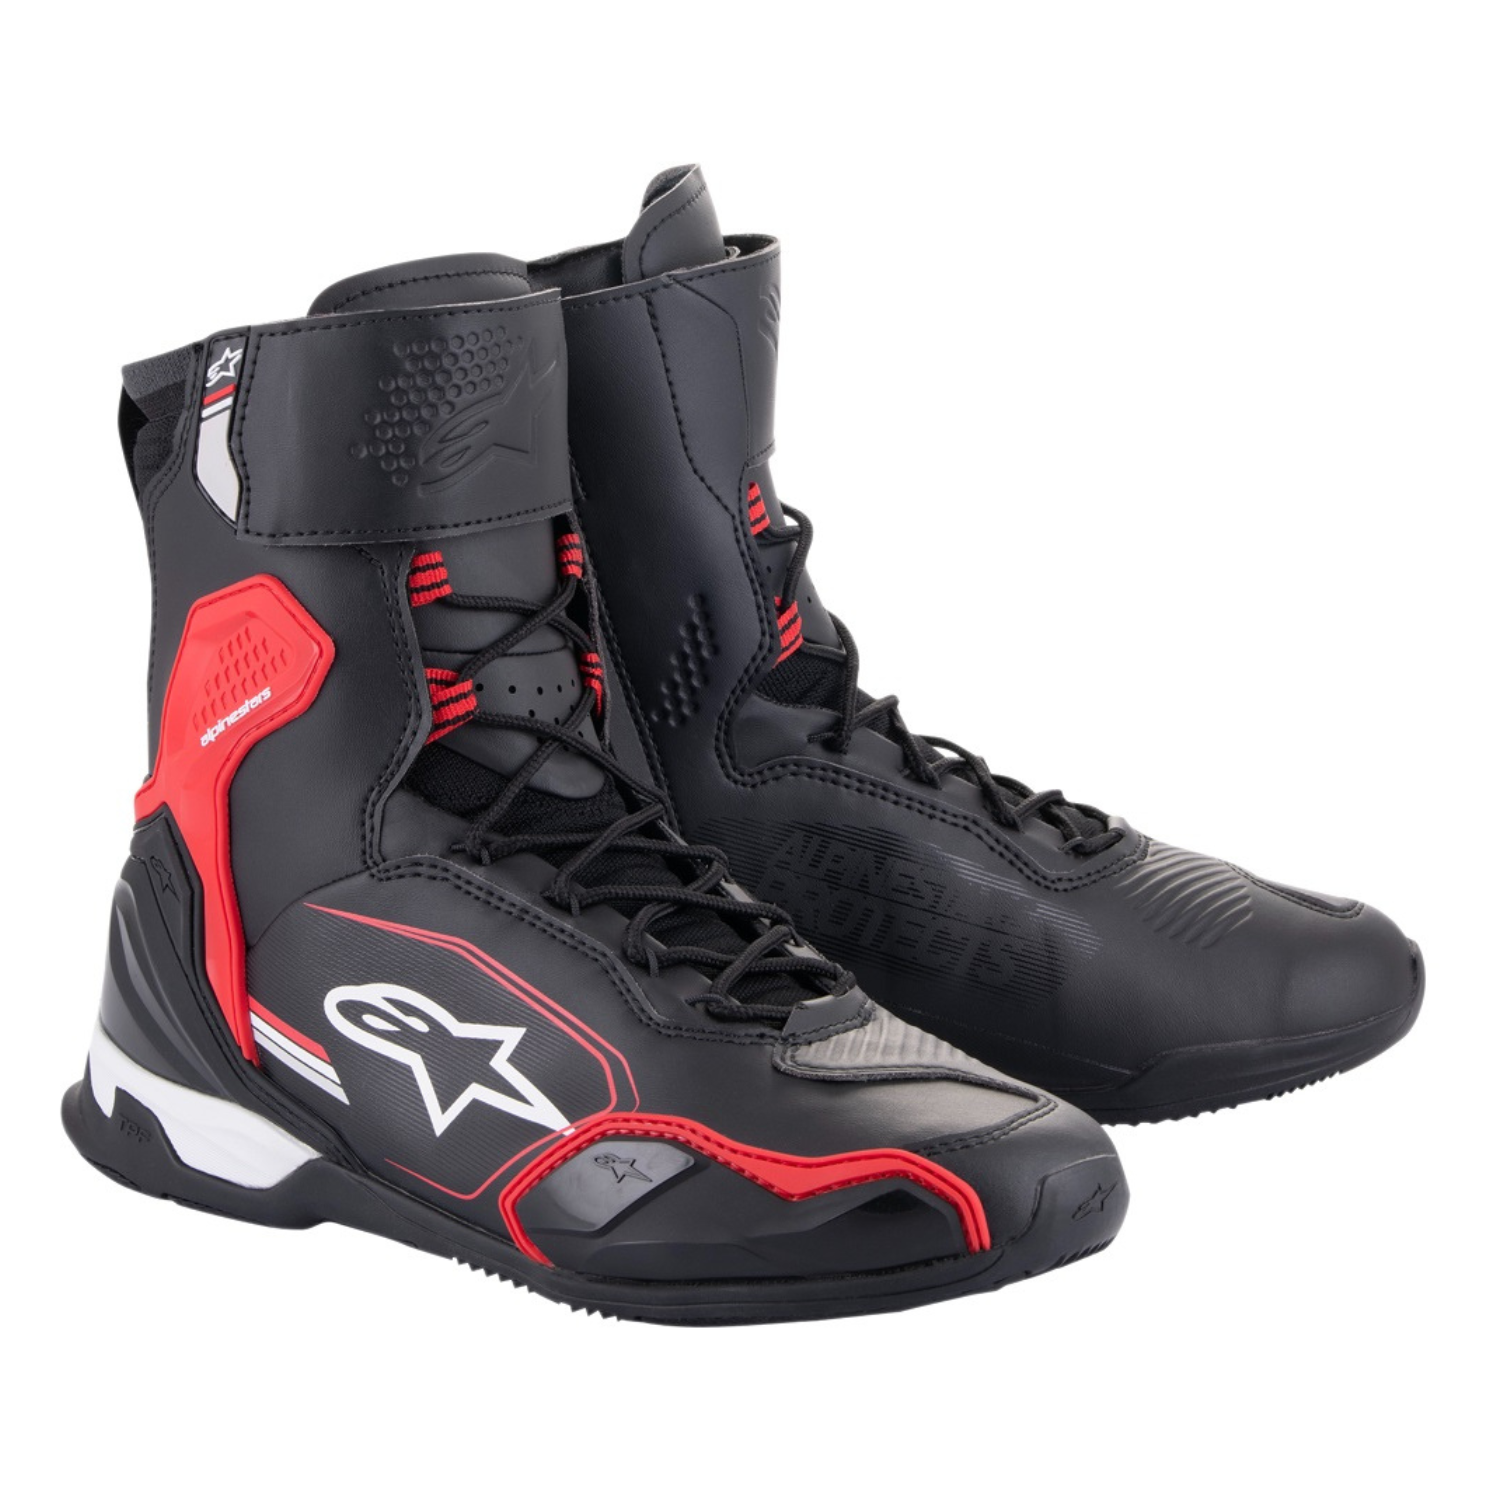 Image of Alpinestars Superfaster Shoes Black Bright Red White Size US 8 ID 8059347260945